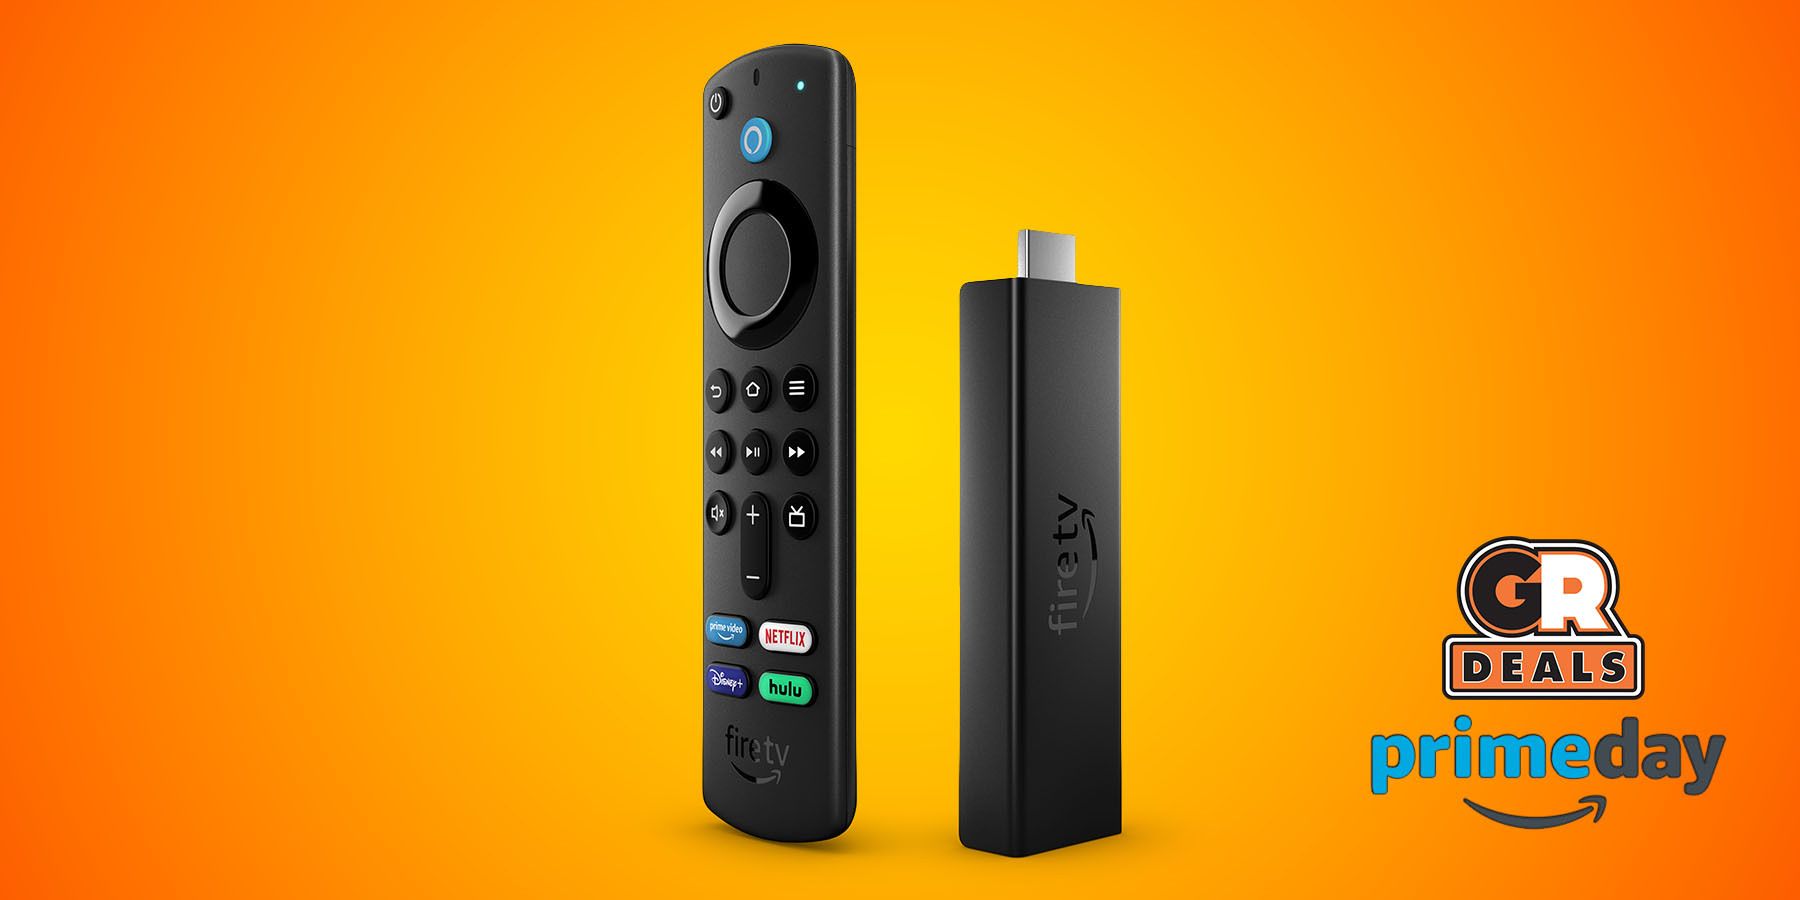 Amazon Fire TV Stick With Alexa Voice Remote Is 58% off on Prime Day